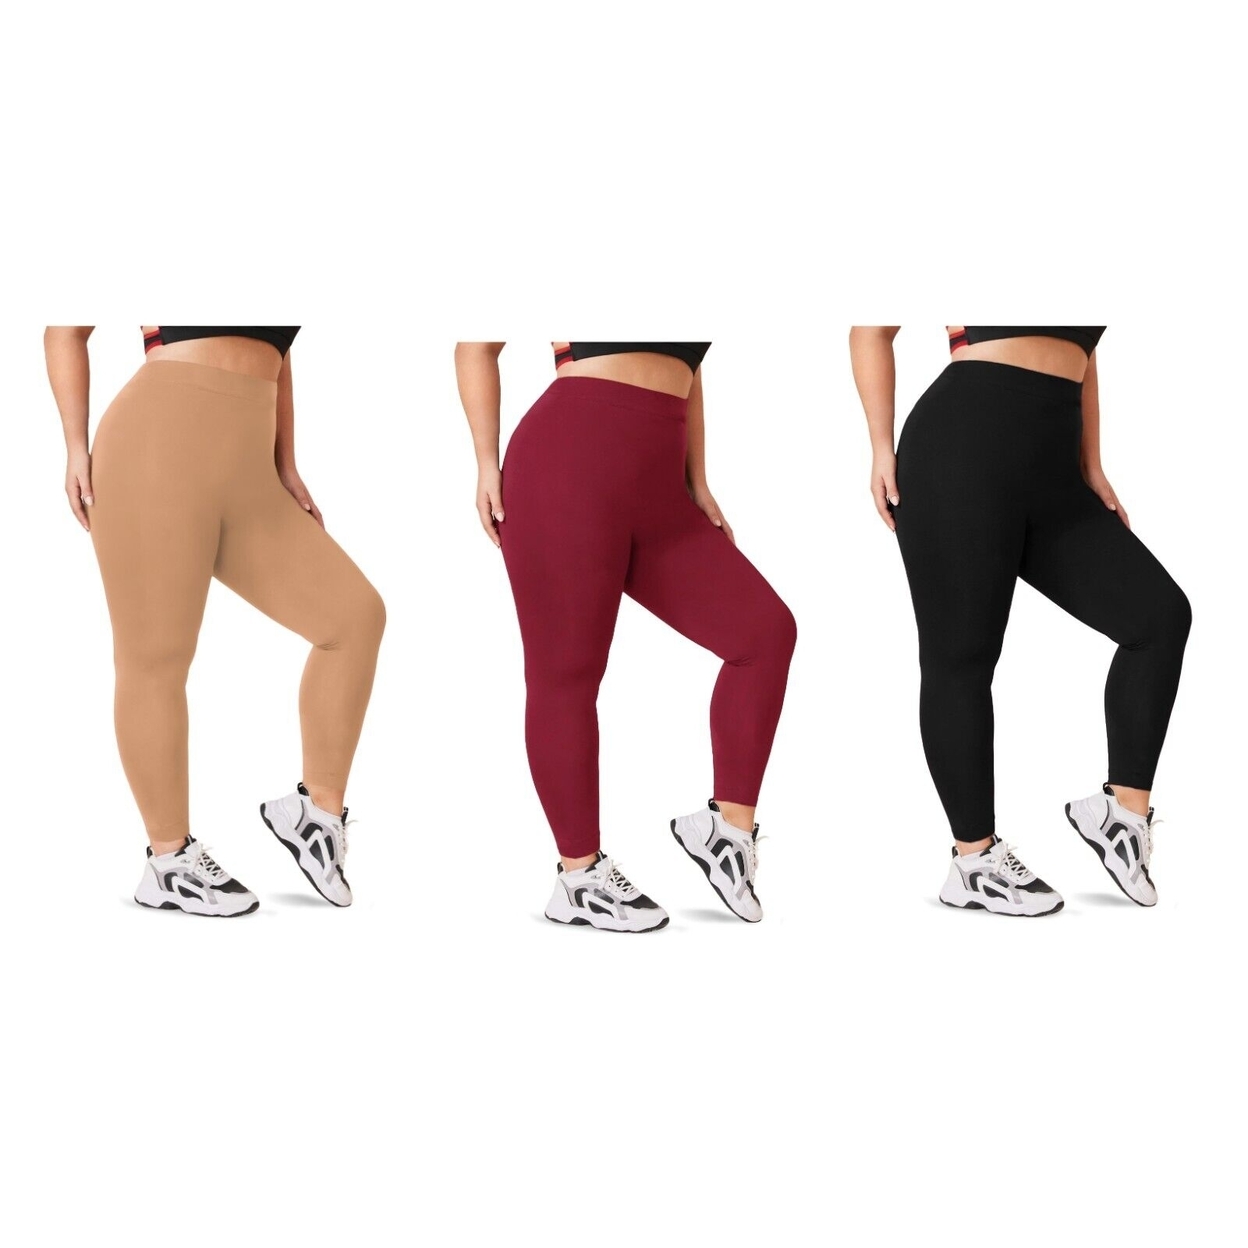 2-Pack: Women's Casual Ultra-Soft Smooth High Waisted Athletic Active Yoga Leggings Plus Size Available - Red & Red, 4x